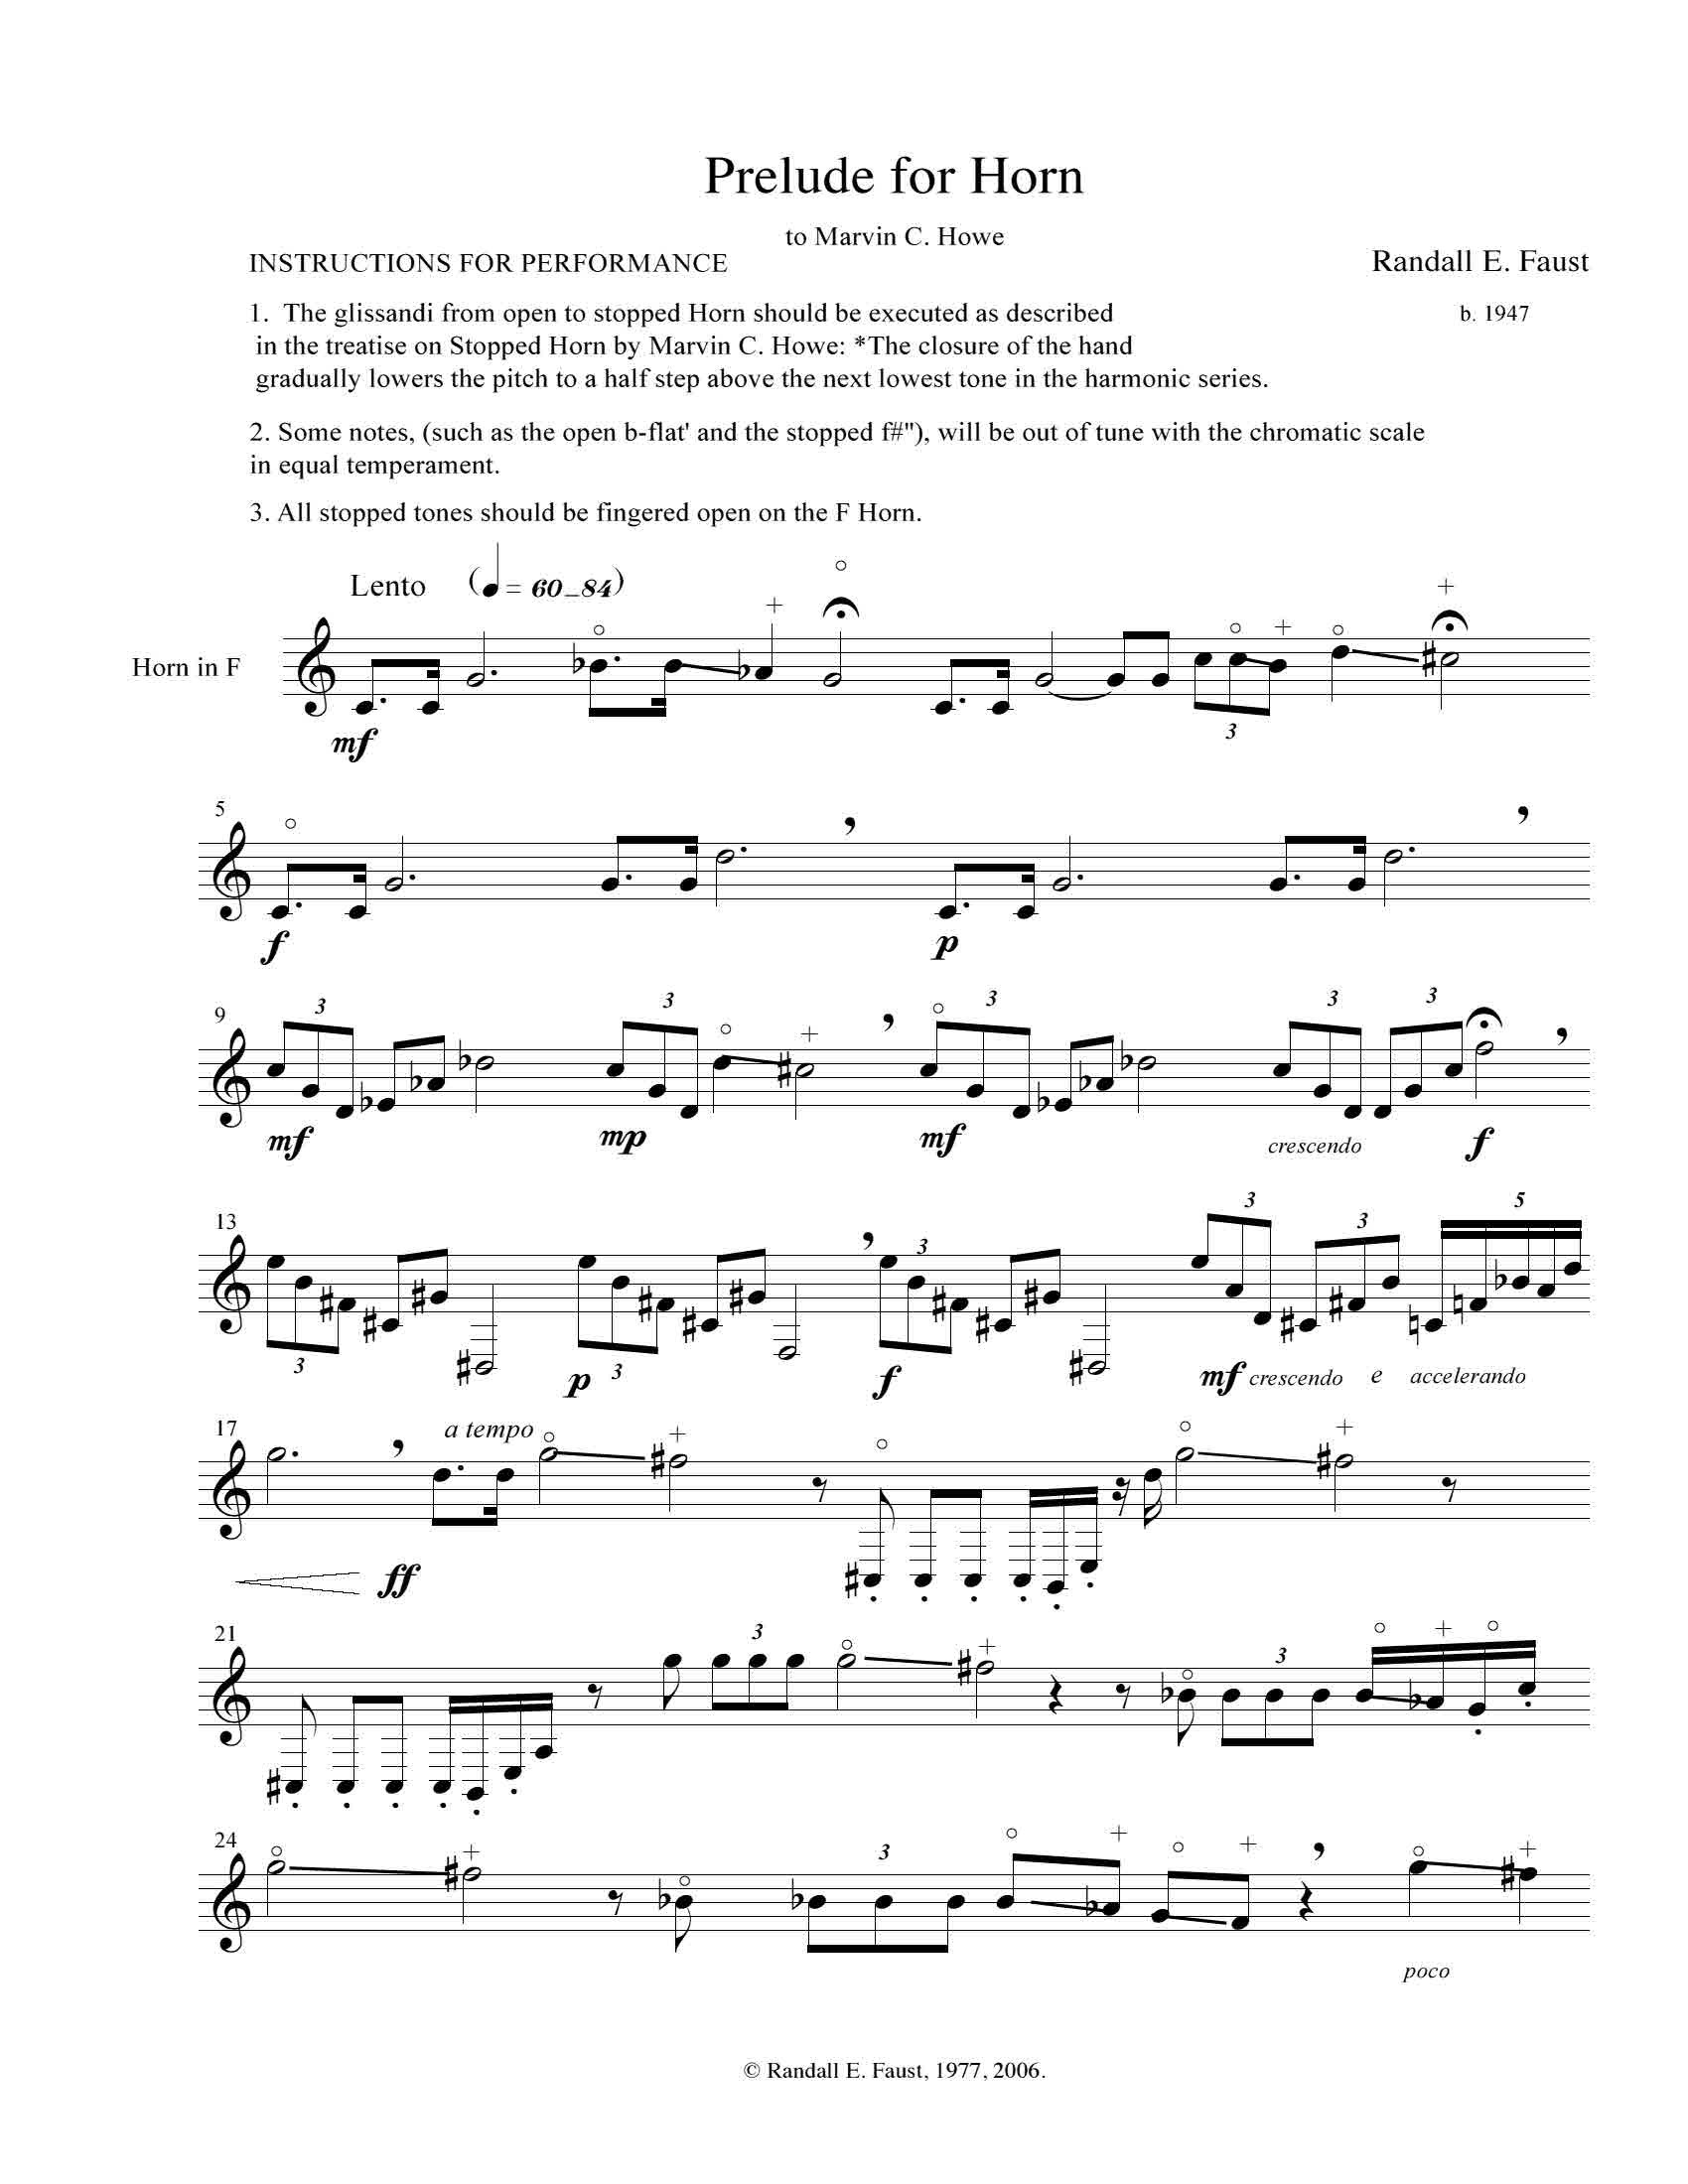 Prelude for Solo Horn